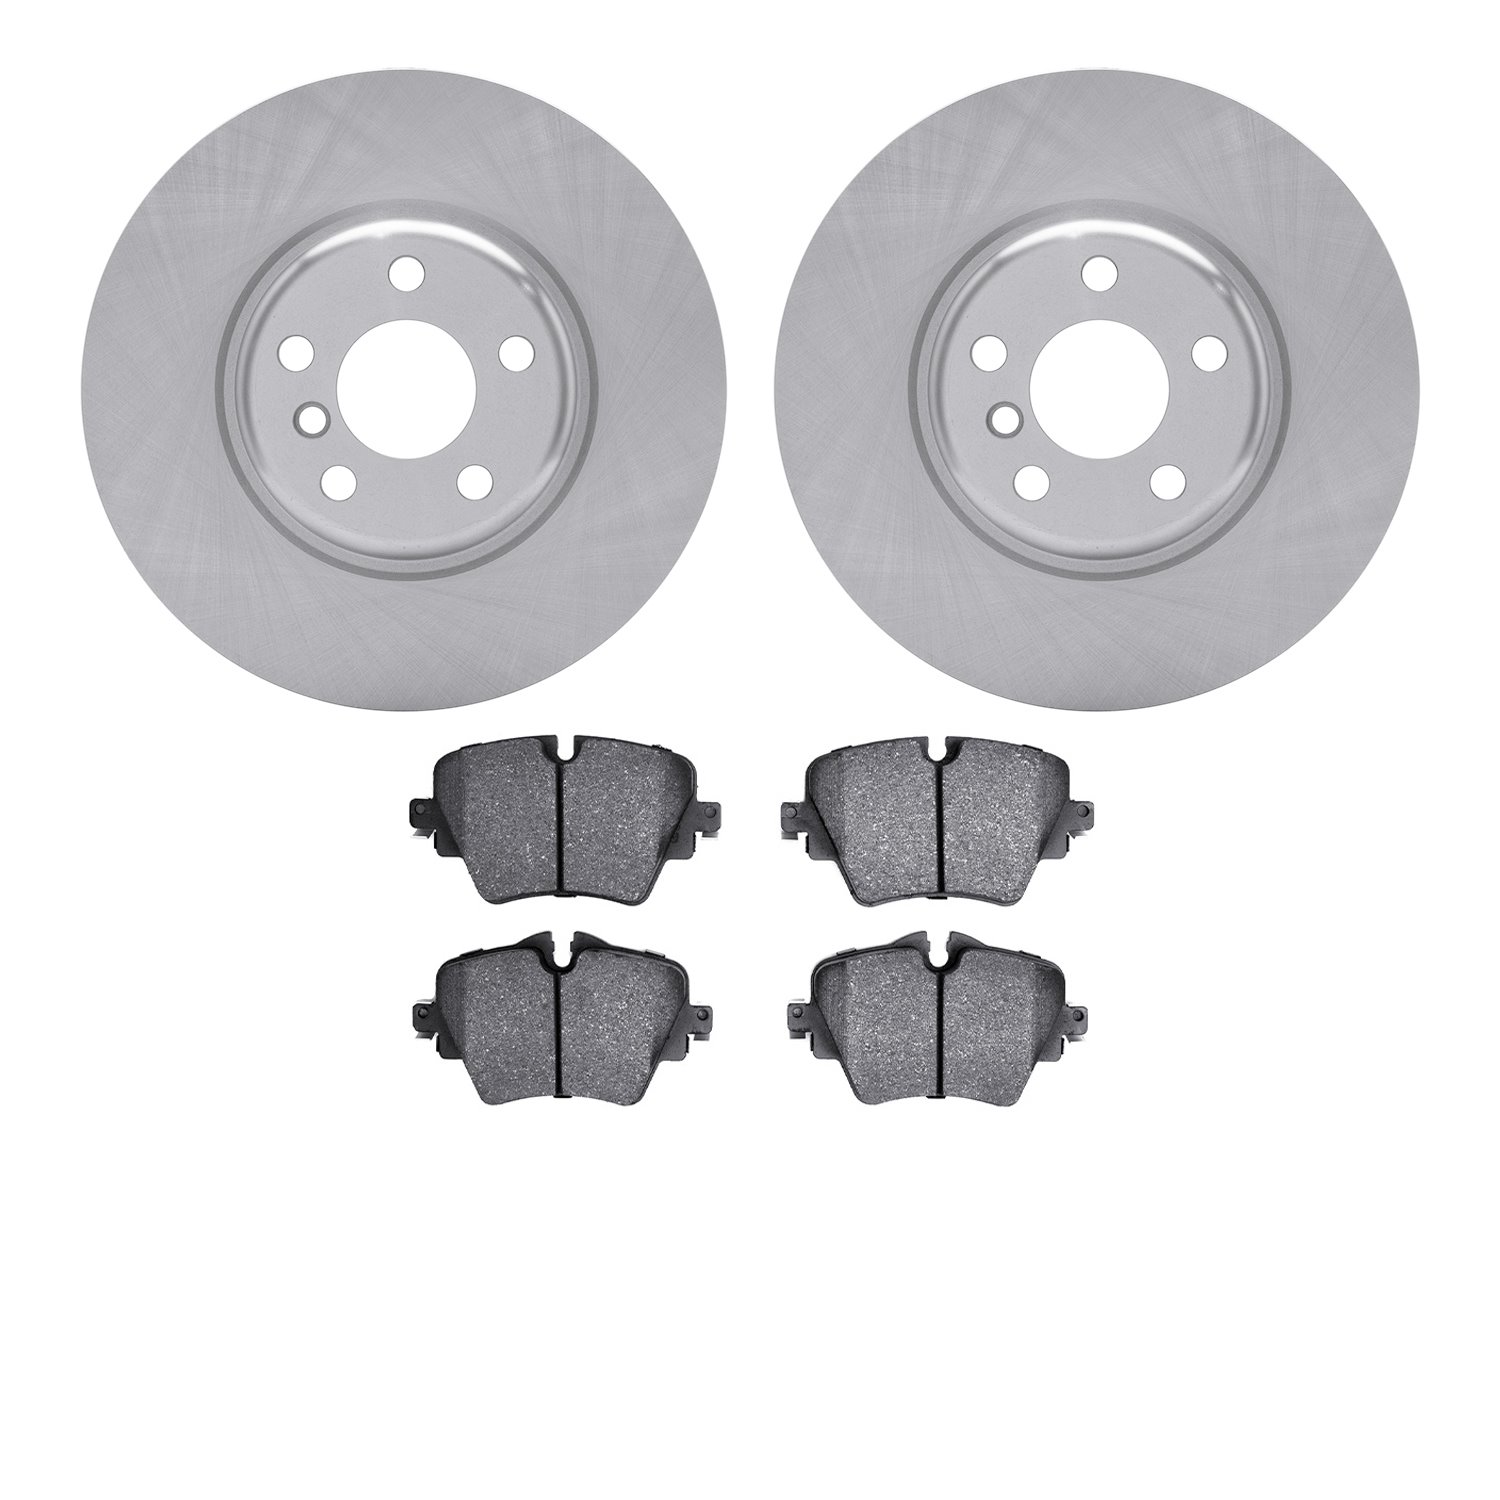 6302-31008 Brake Rotors with 3000-Series Ceramic Brake Pads Kit, Fits Select Multiple Makes/Models, Position: Front